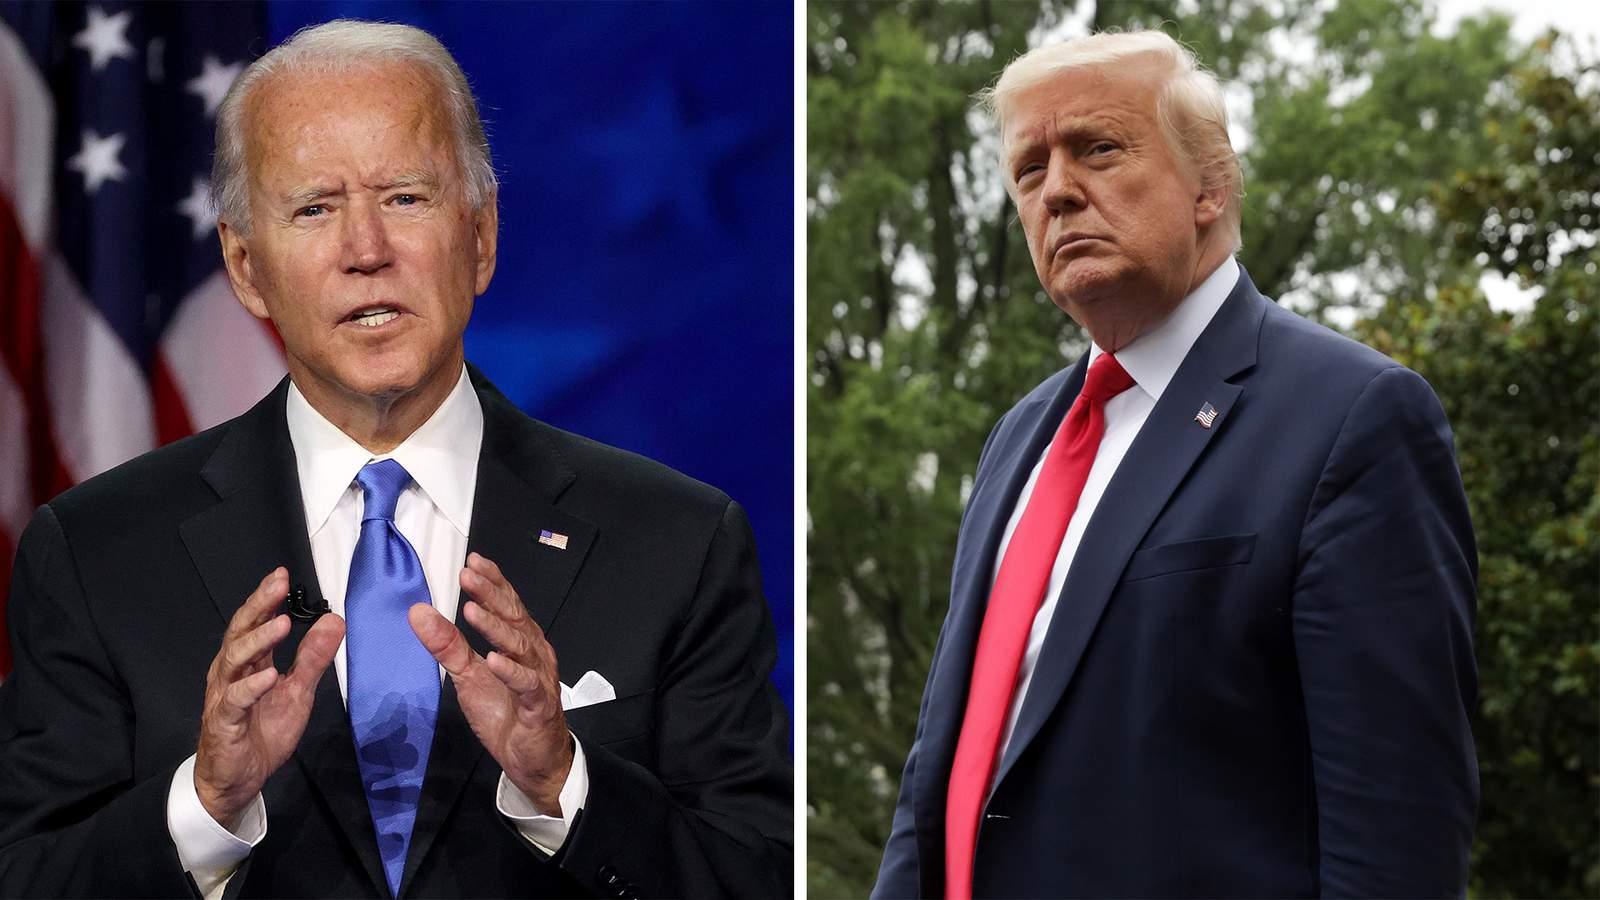 FACT CHECK LIVE: Trump, Biden in first Presidential Debate of 2020 election